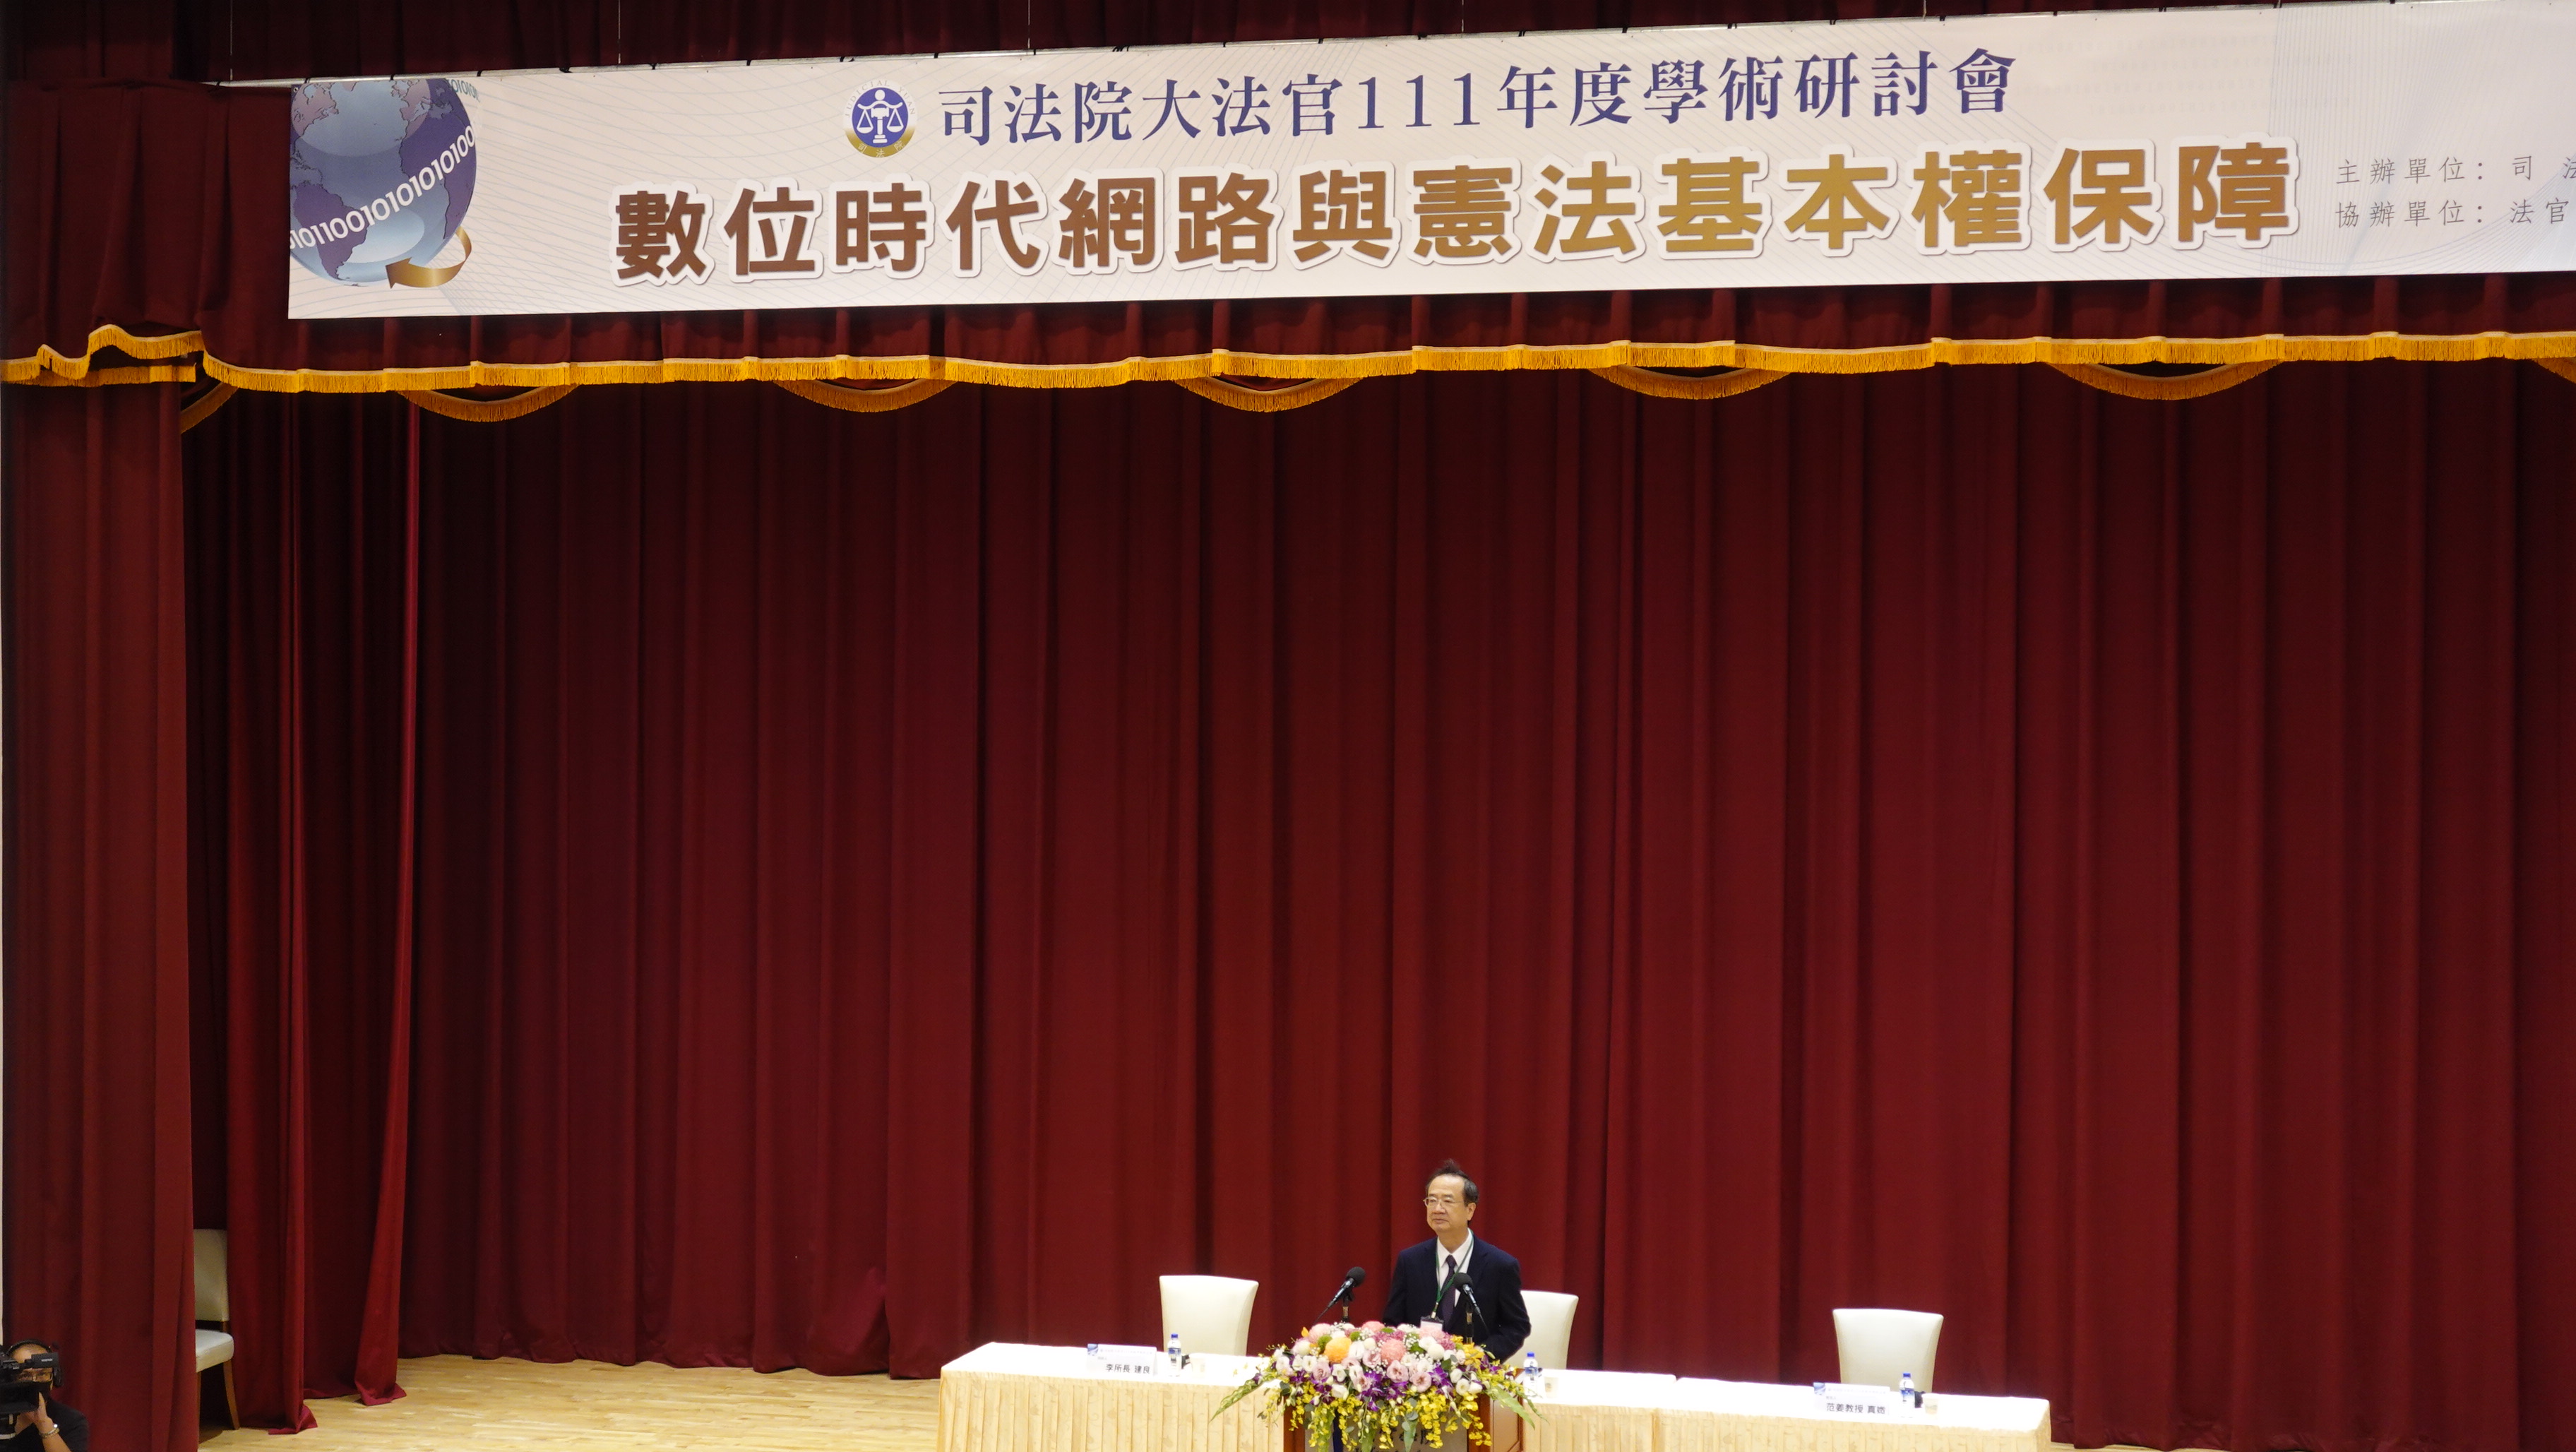 Opening Remarks from President HSU of the Judicial Yuan.